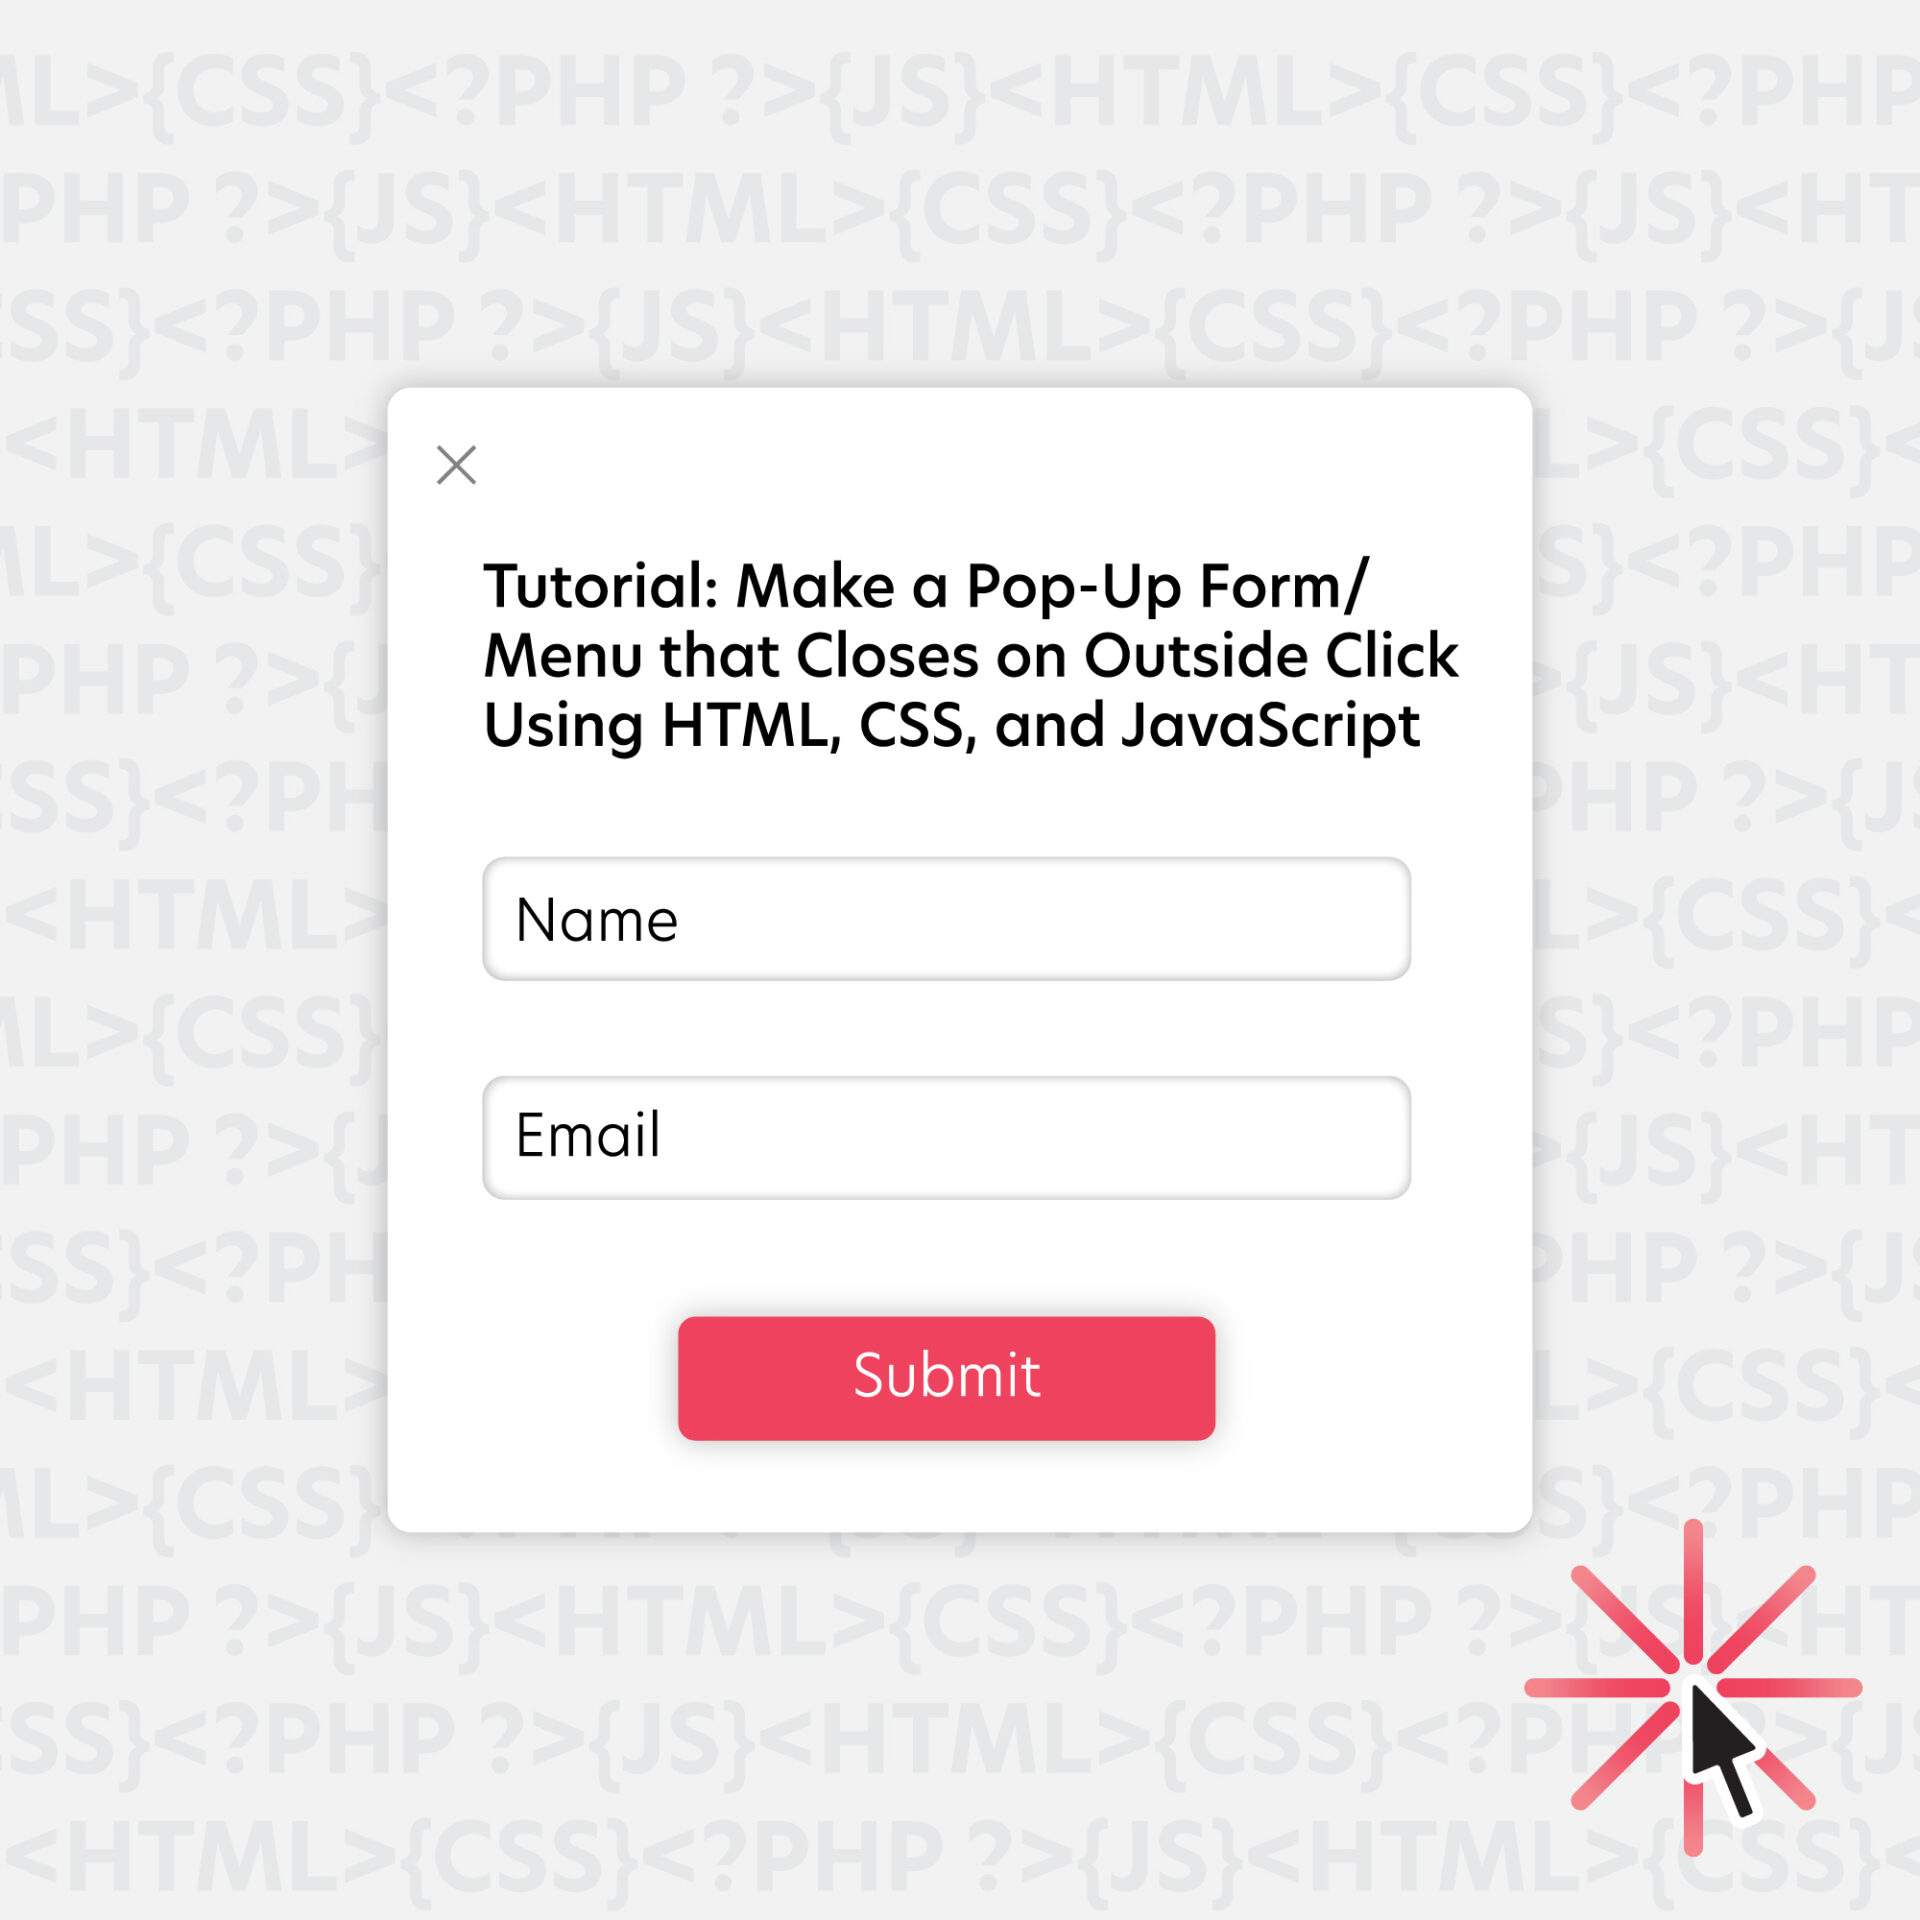 Pop-Up Card of Tutorial Example with Clicking Cursor